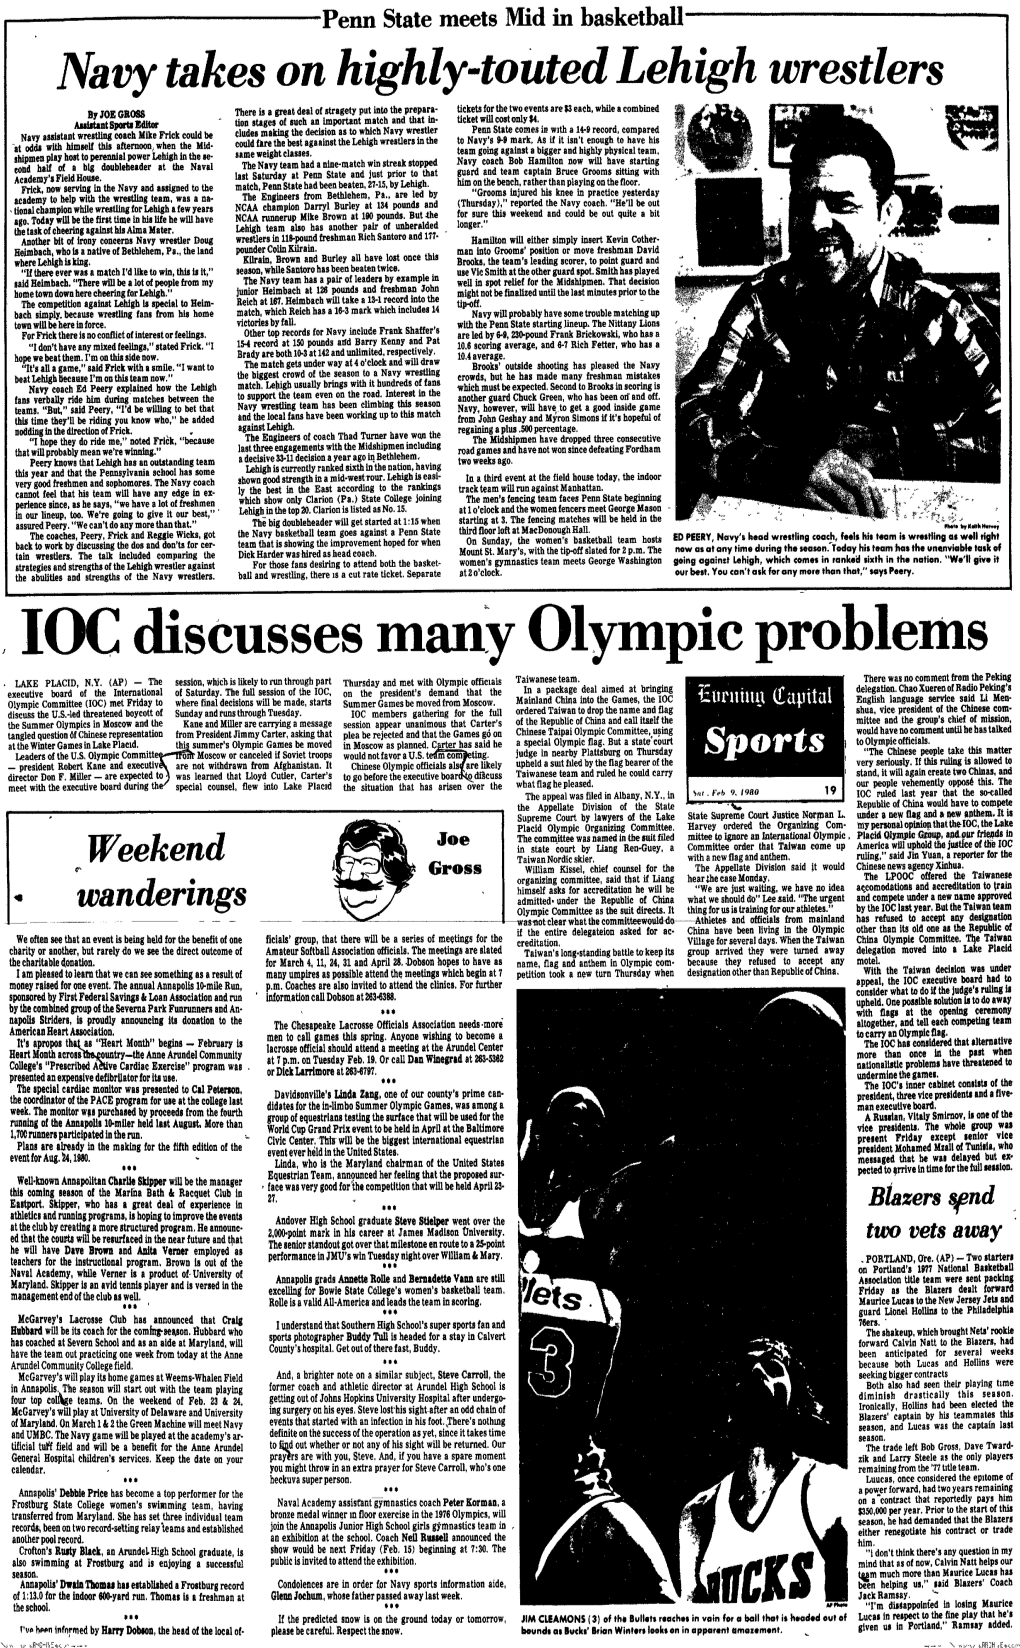 IOC Discusses Many Olympic Problems